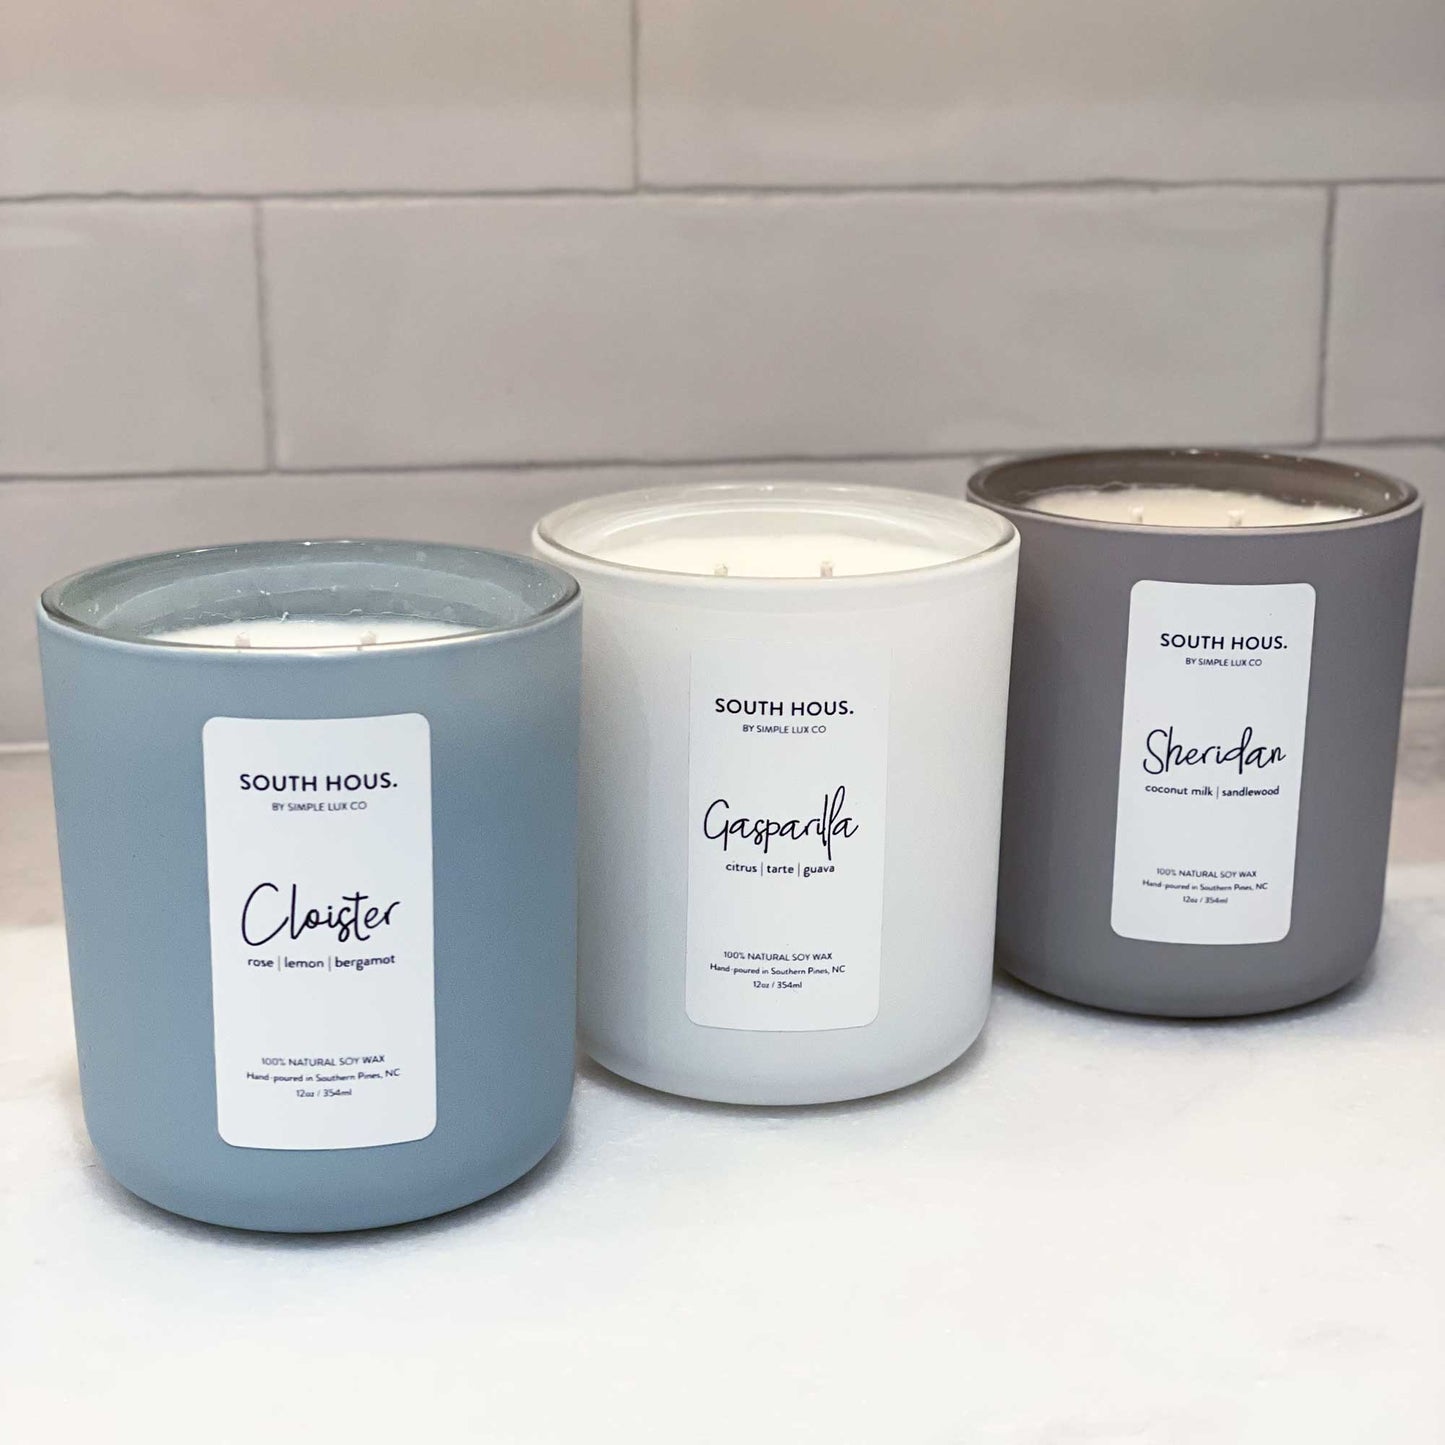 South Hous Destination Candle lifestyle product lineup shot in Cloister Gasparilla Sheridan by Simple Lux Co for South Hous.